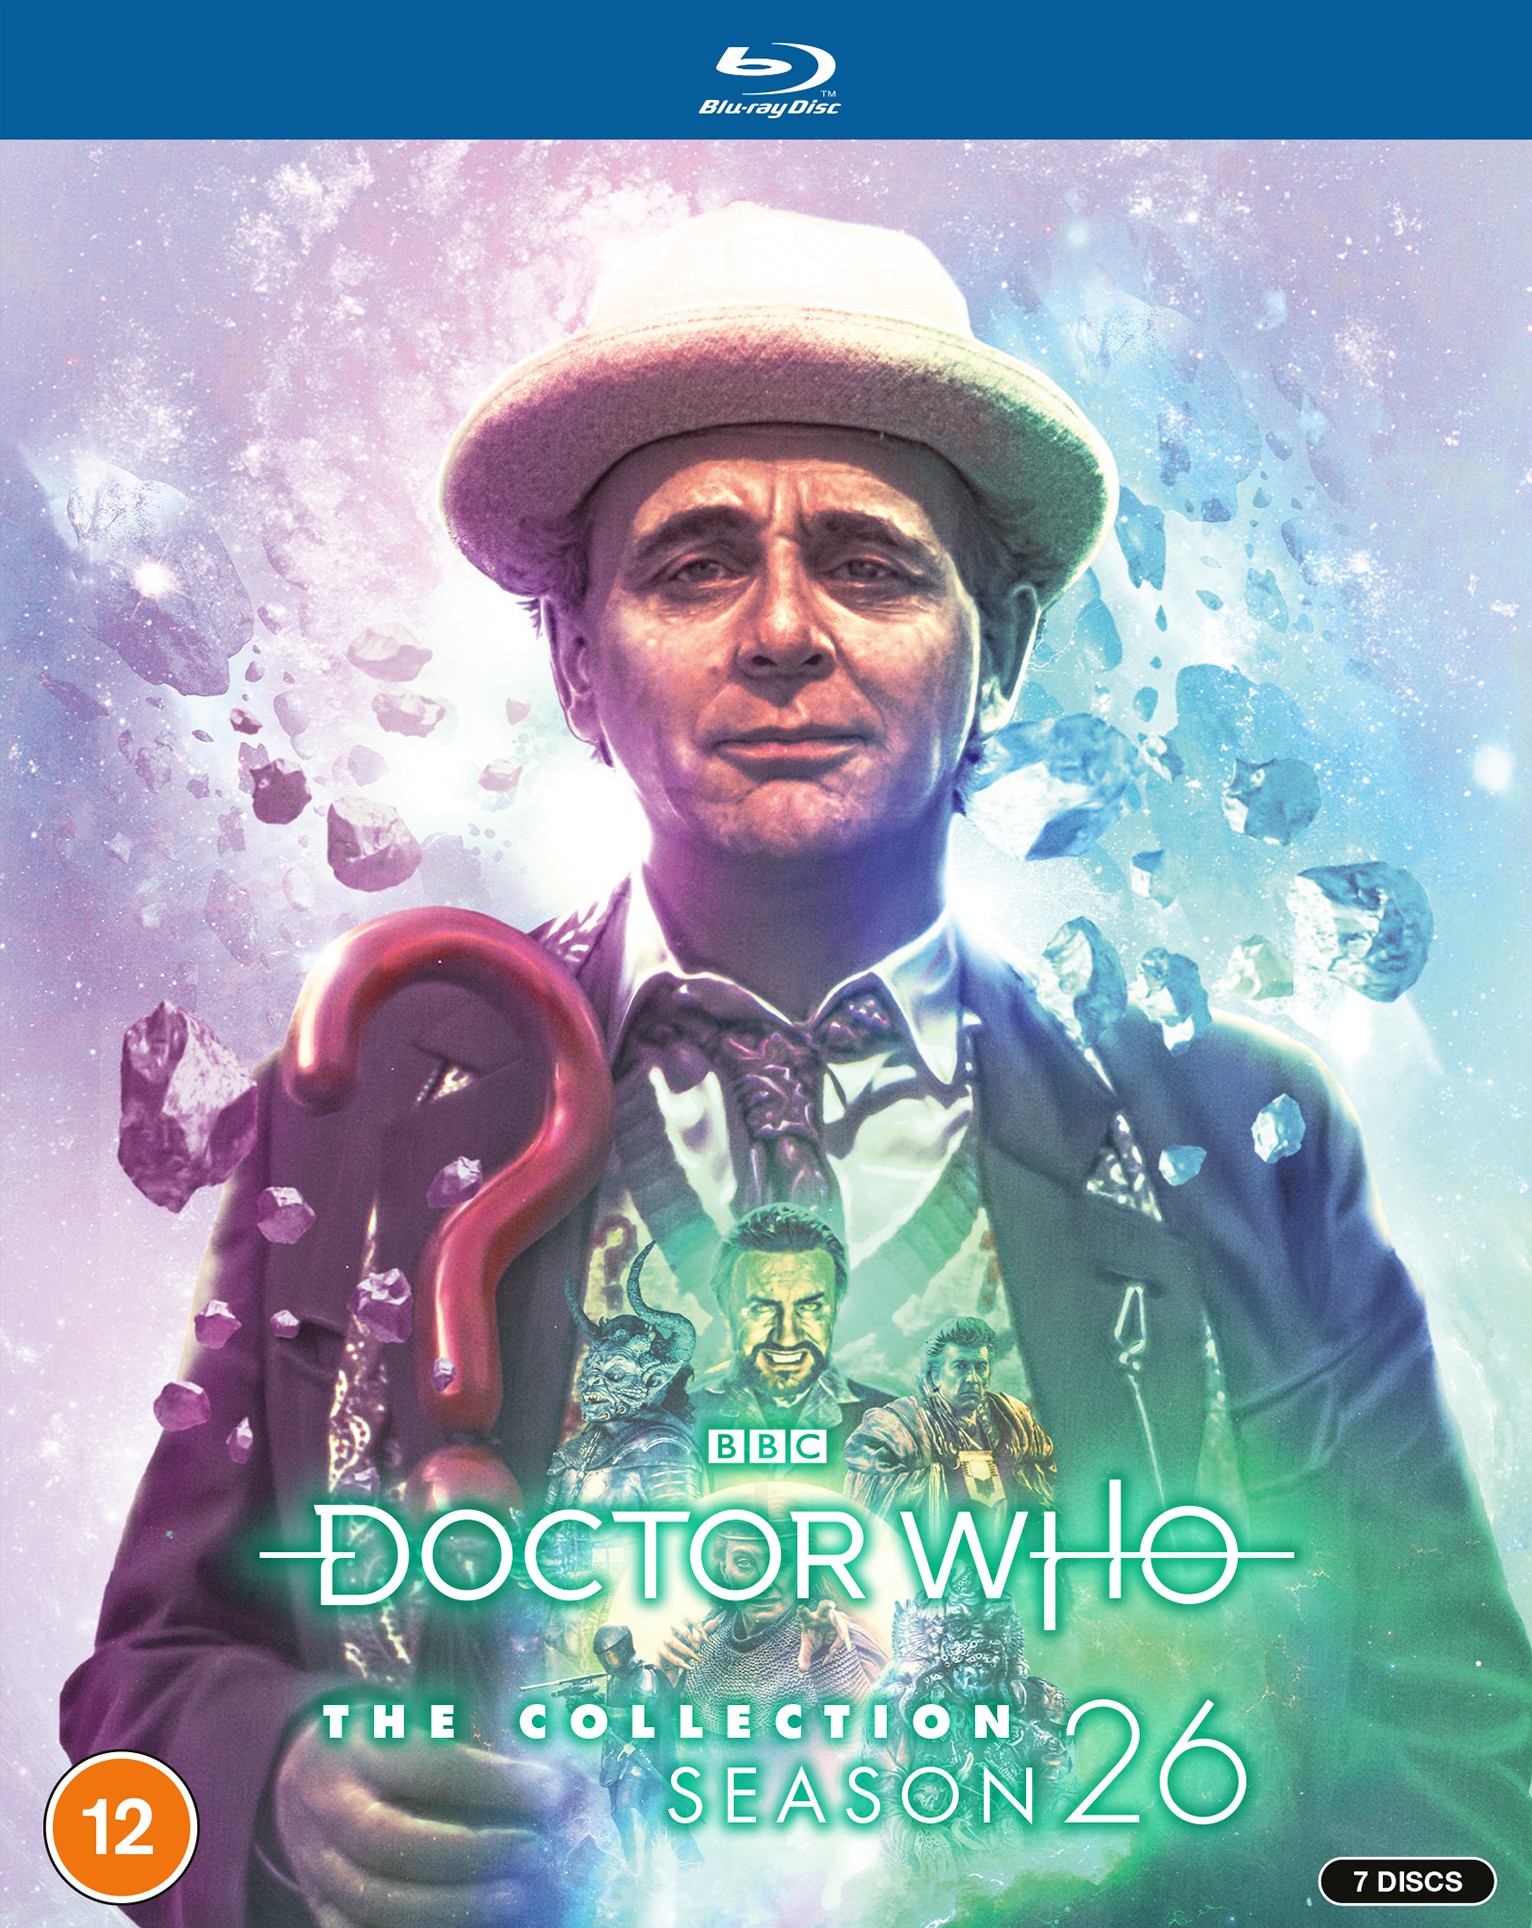 Doctor Who: The Collection – Season 26 Standard